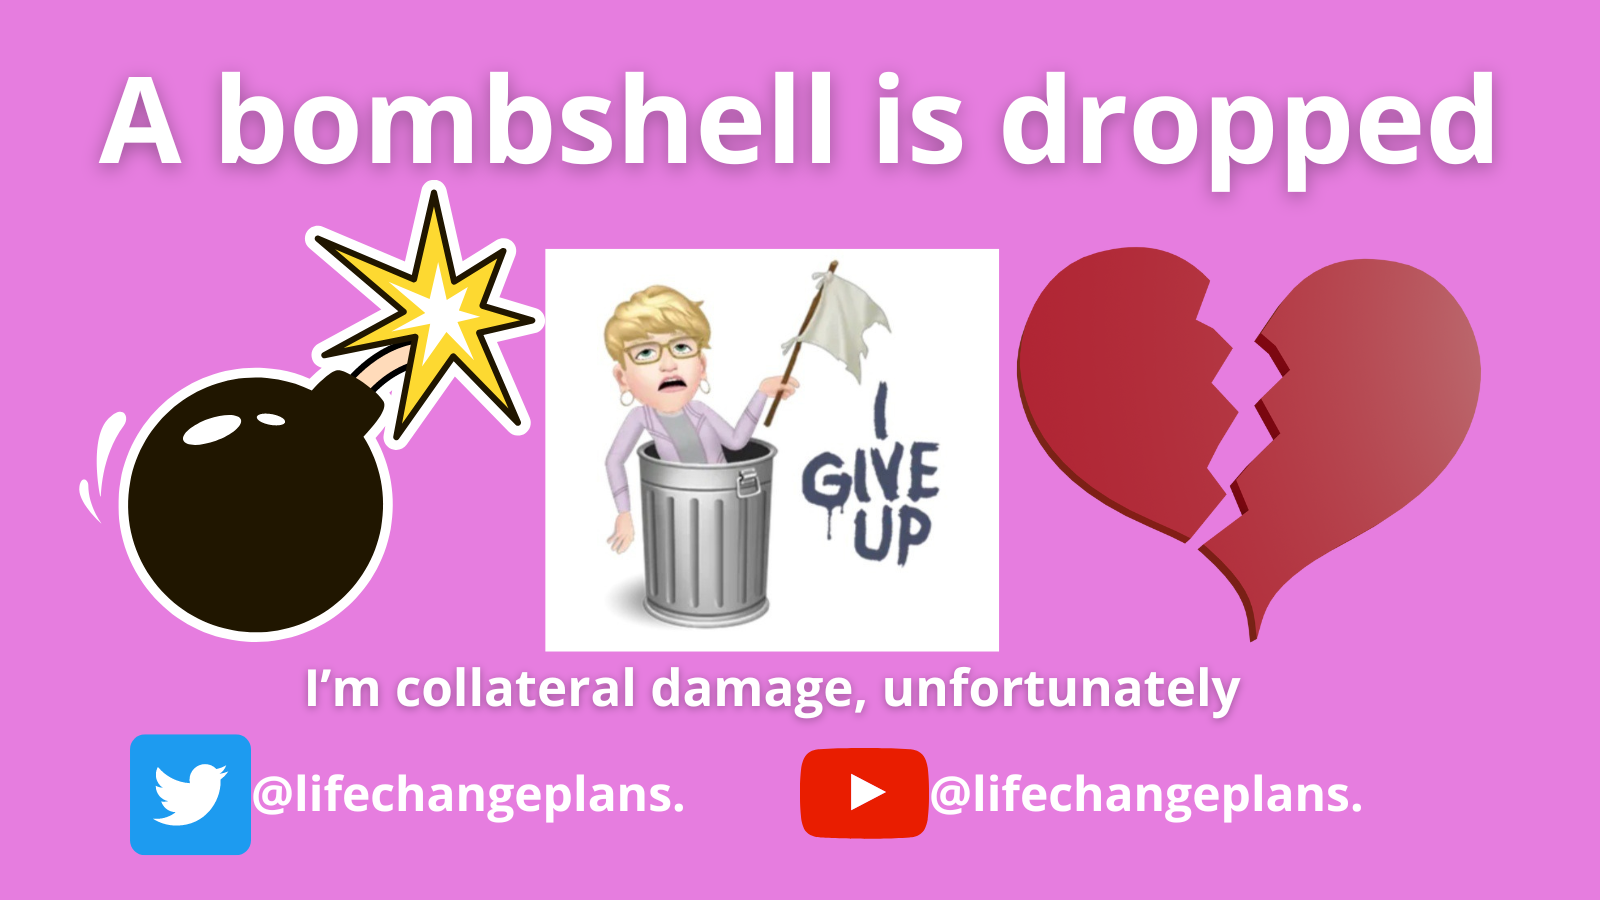 After a bombshell is dropped - I give up - heartbroken.